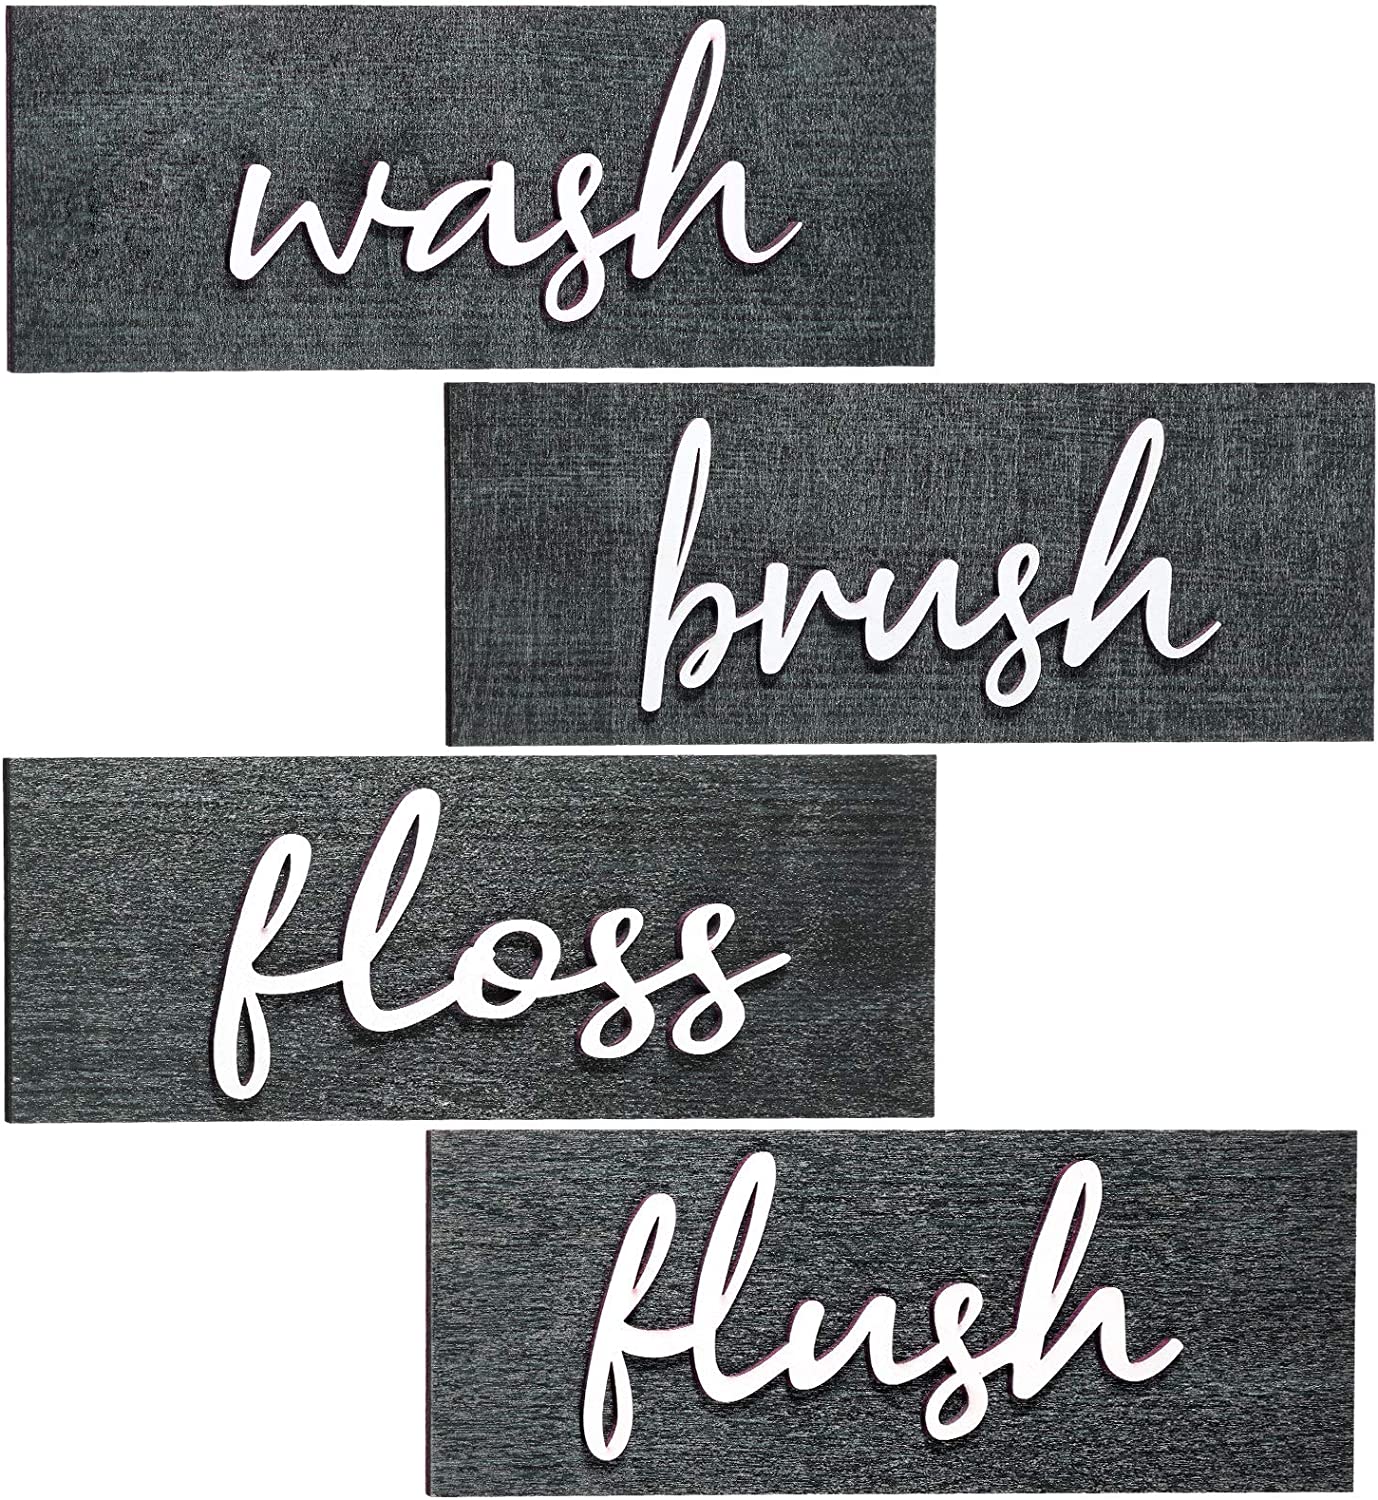 Jetec 4 Pieces Farmhouse Bathroom Wall Decors Wash Brush Floss Flush Signs Rustic Hanging Wooden Signs Primitive Bathroom Wall Arts Vintage Wooden Decorations for Home Laundry Room Bathroom (Gray)